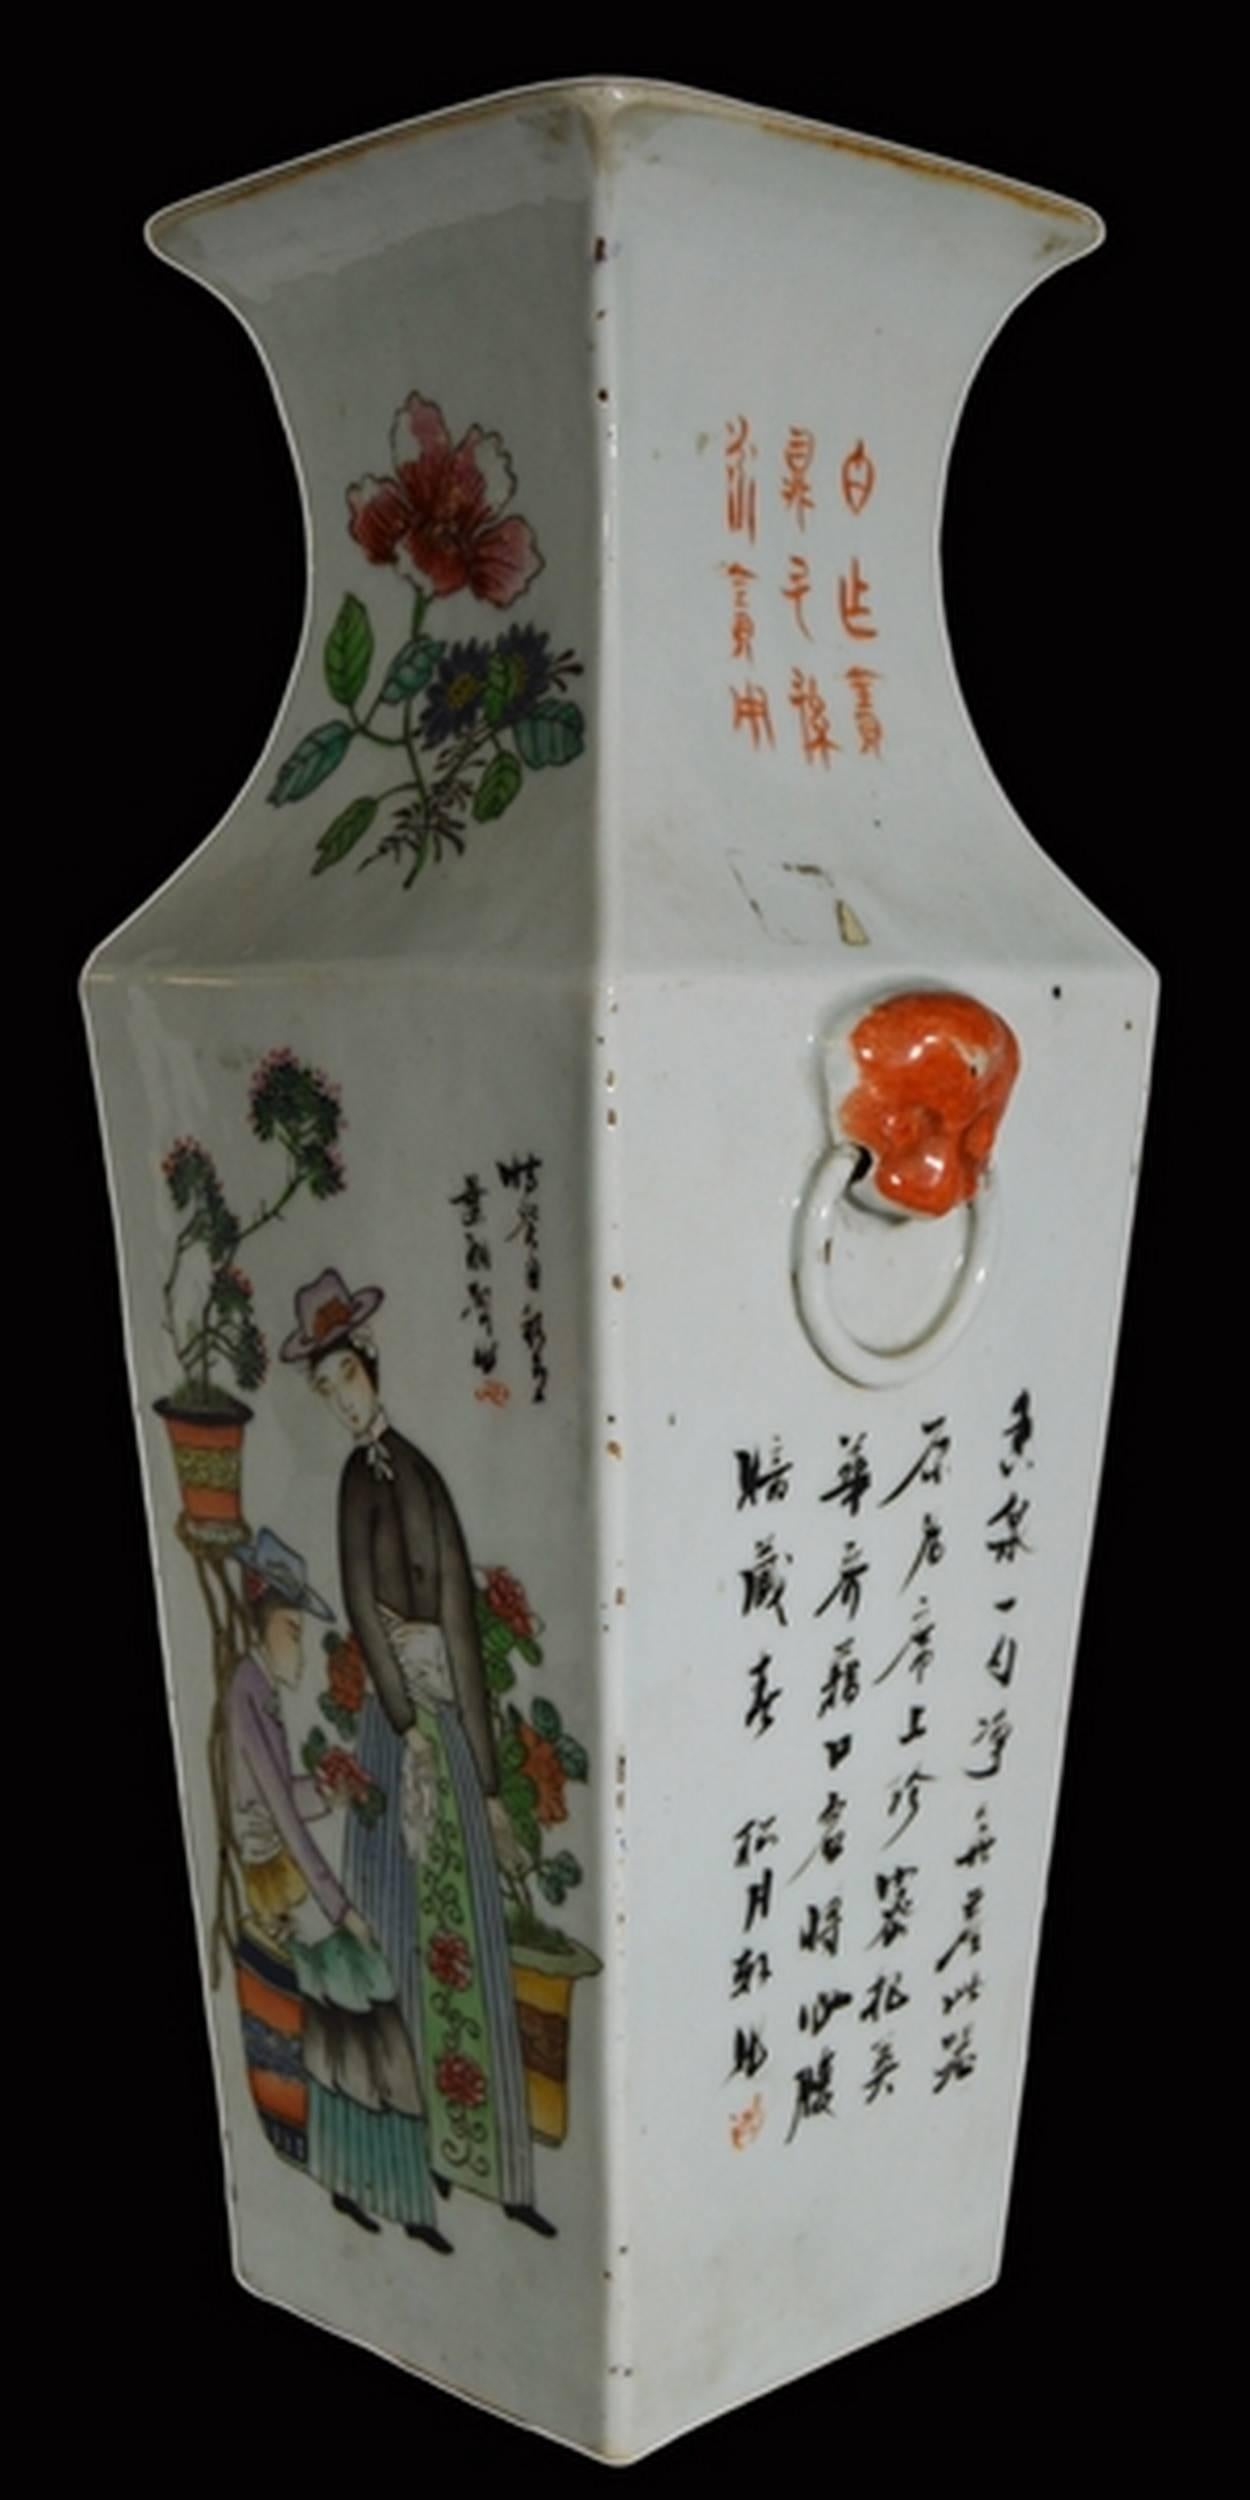 A Chinese, 19th century vase with scenes hand-painted on porcelain. This vase adopts a traditional Chinese square shape with a tall flared neck. On the white porcelain background are numerous colorful painted scenes. One scene features Chinese women